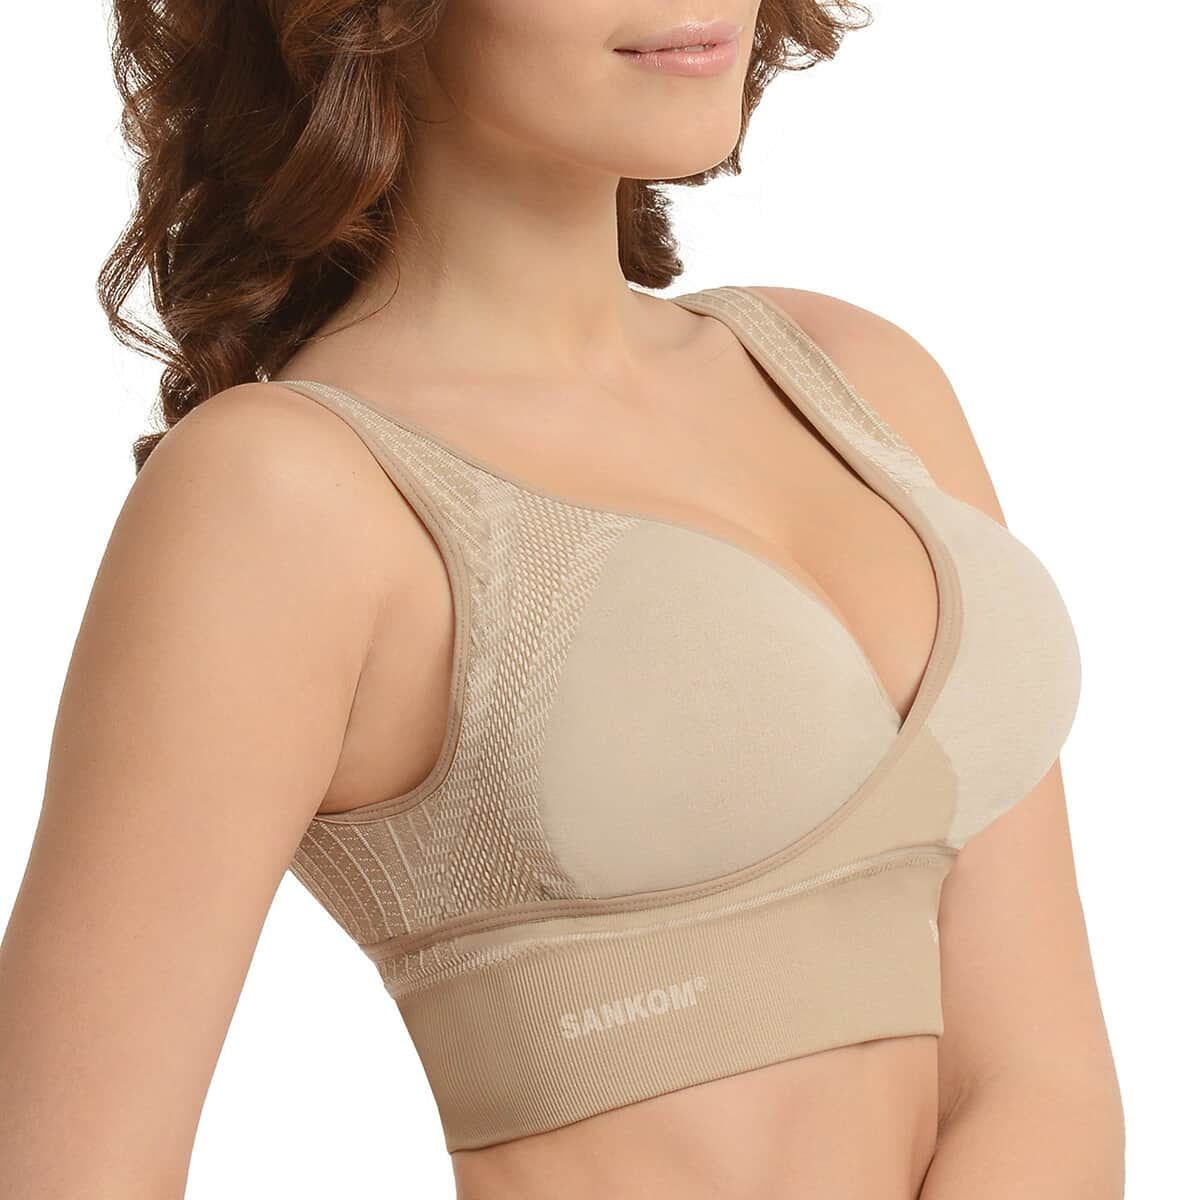 Shop LC SANKOM-Beige Color Support & Posture Bra with Cooling Fibers - S/M  Birthday Gifts 